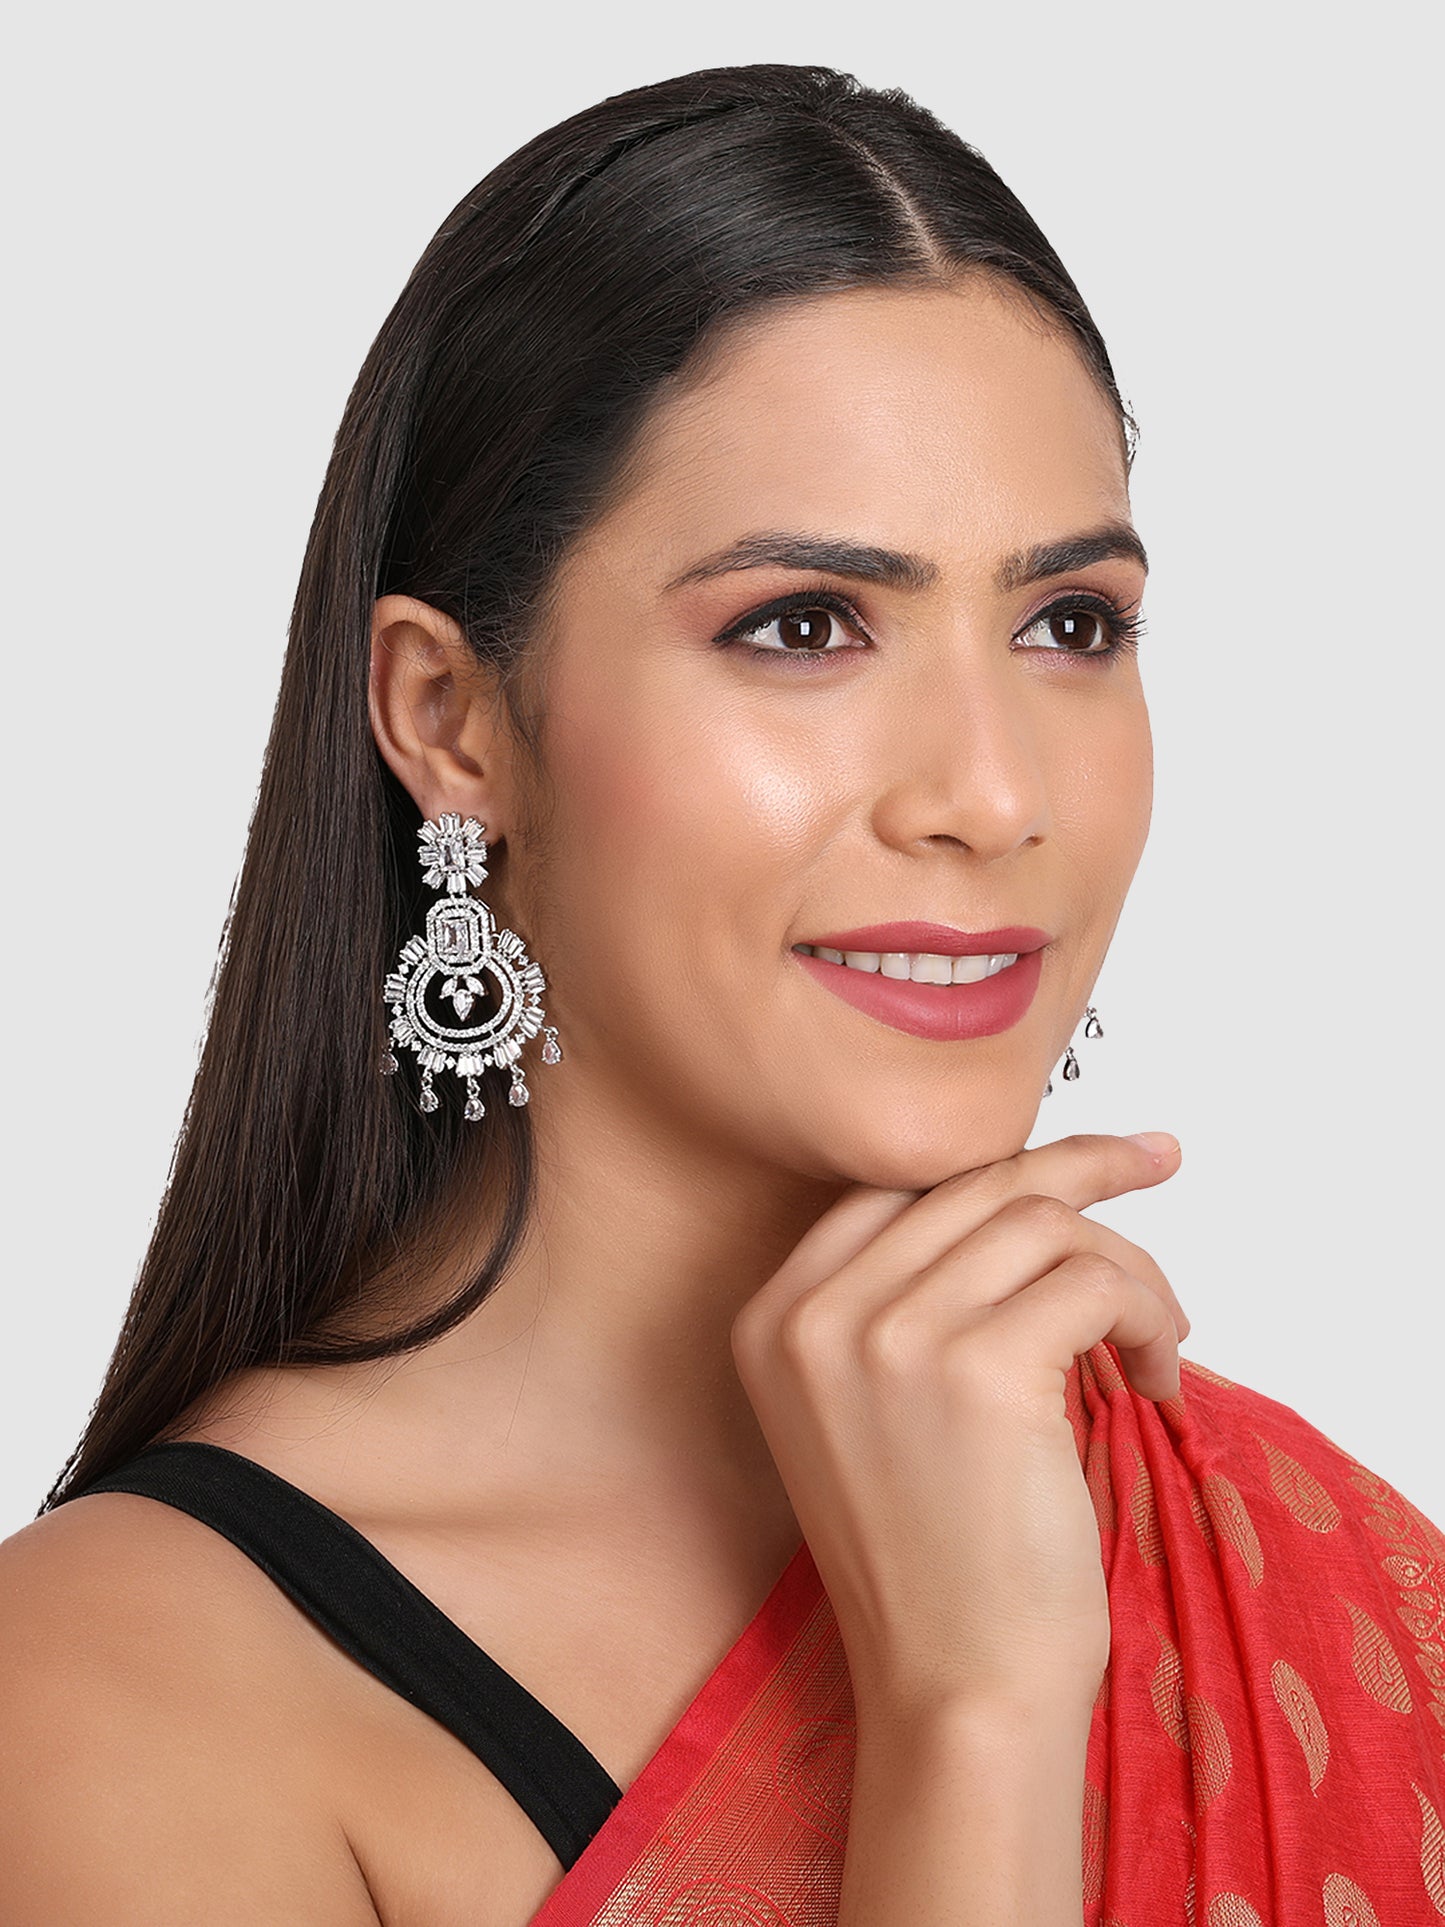 White & Silver Plated Quirky Chandbalis Earrings